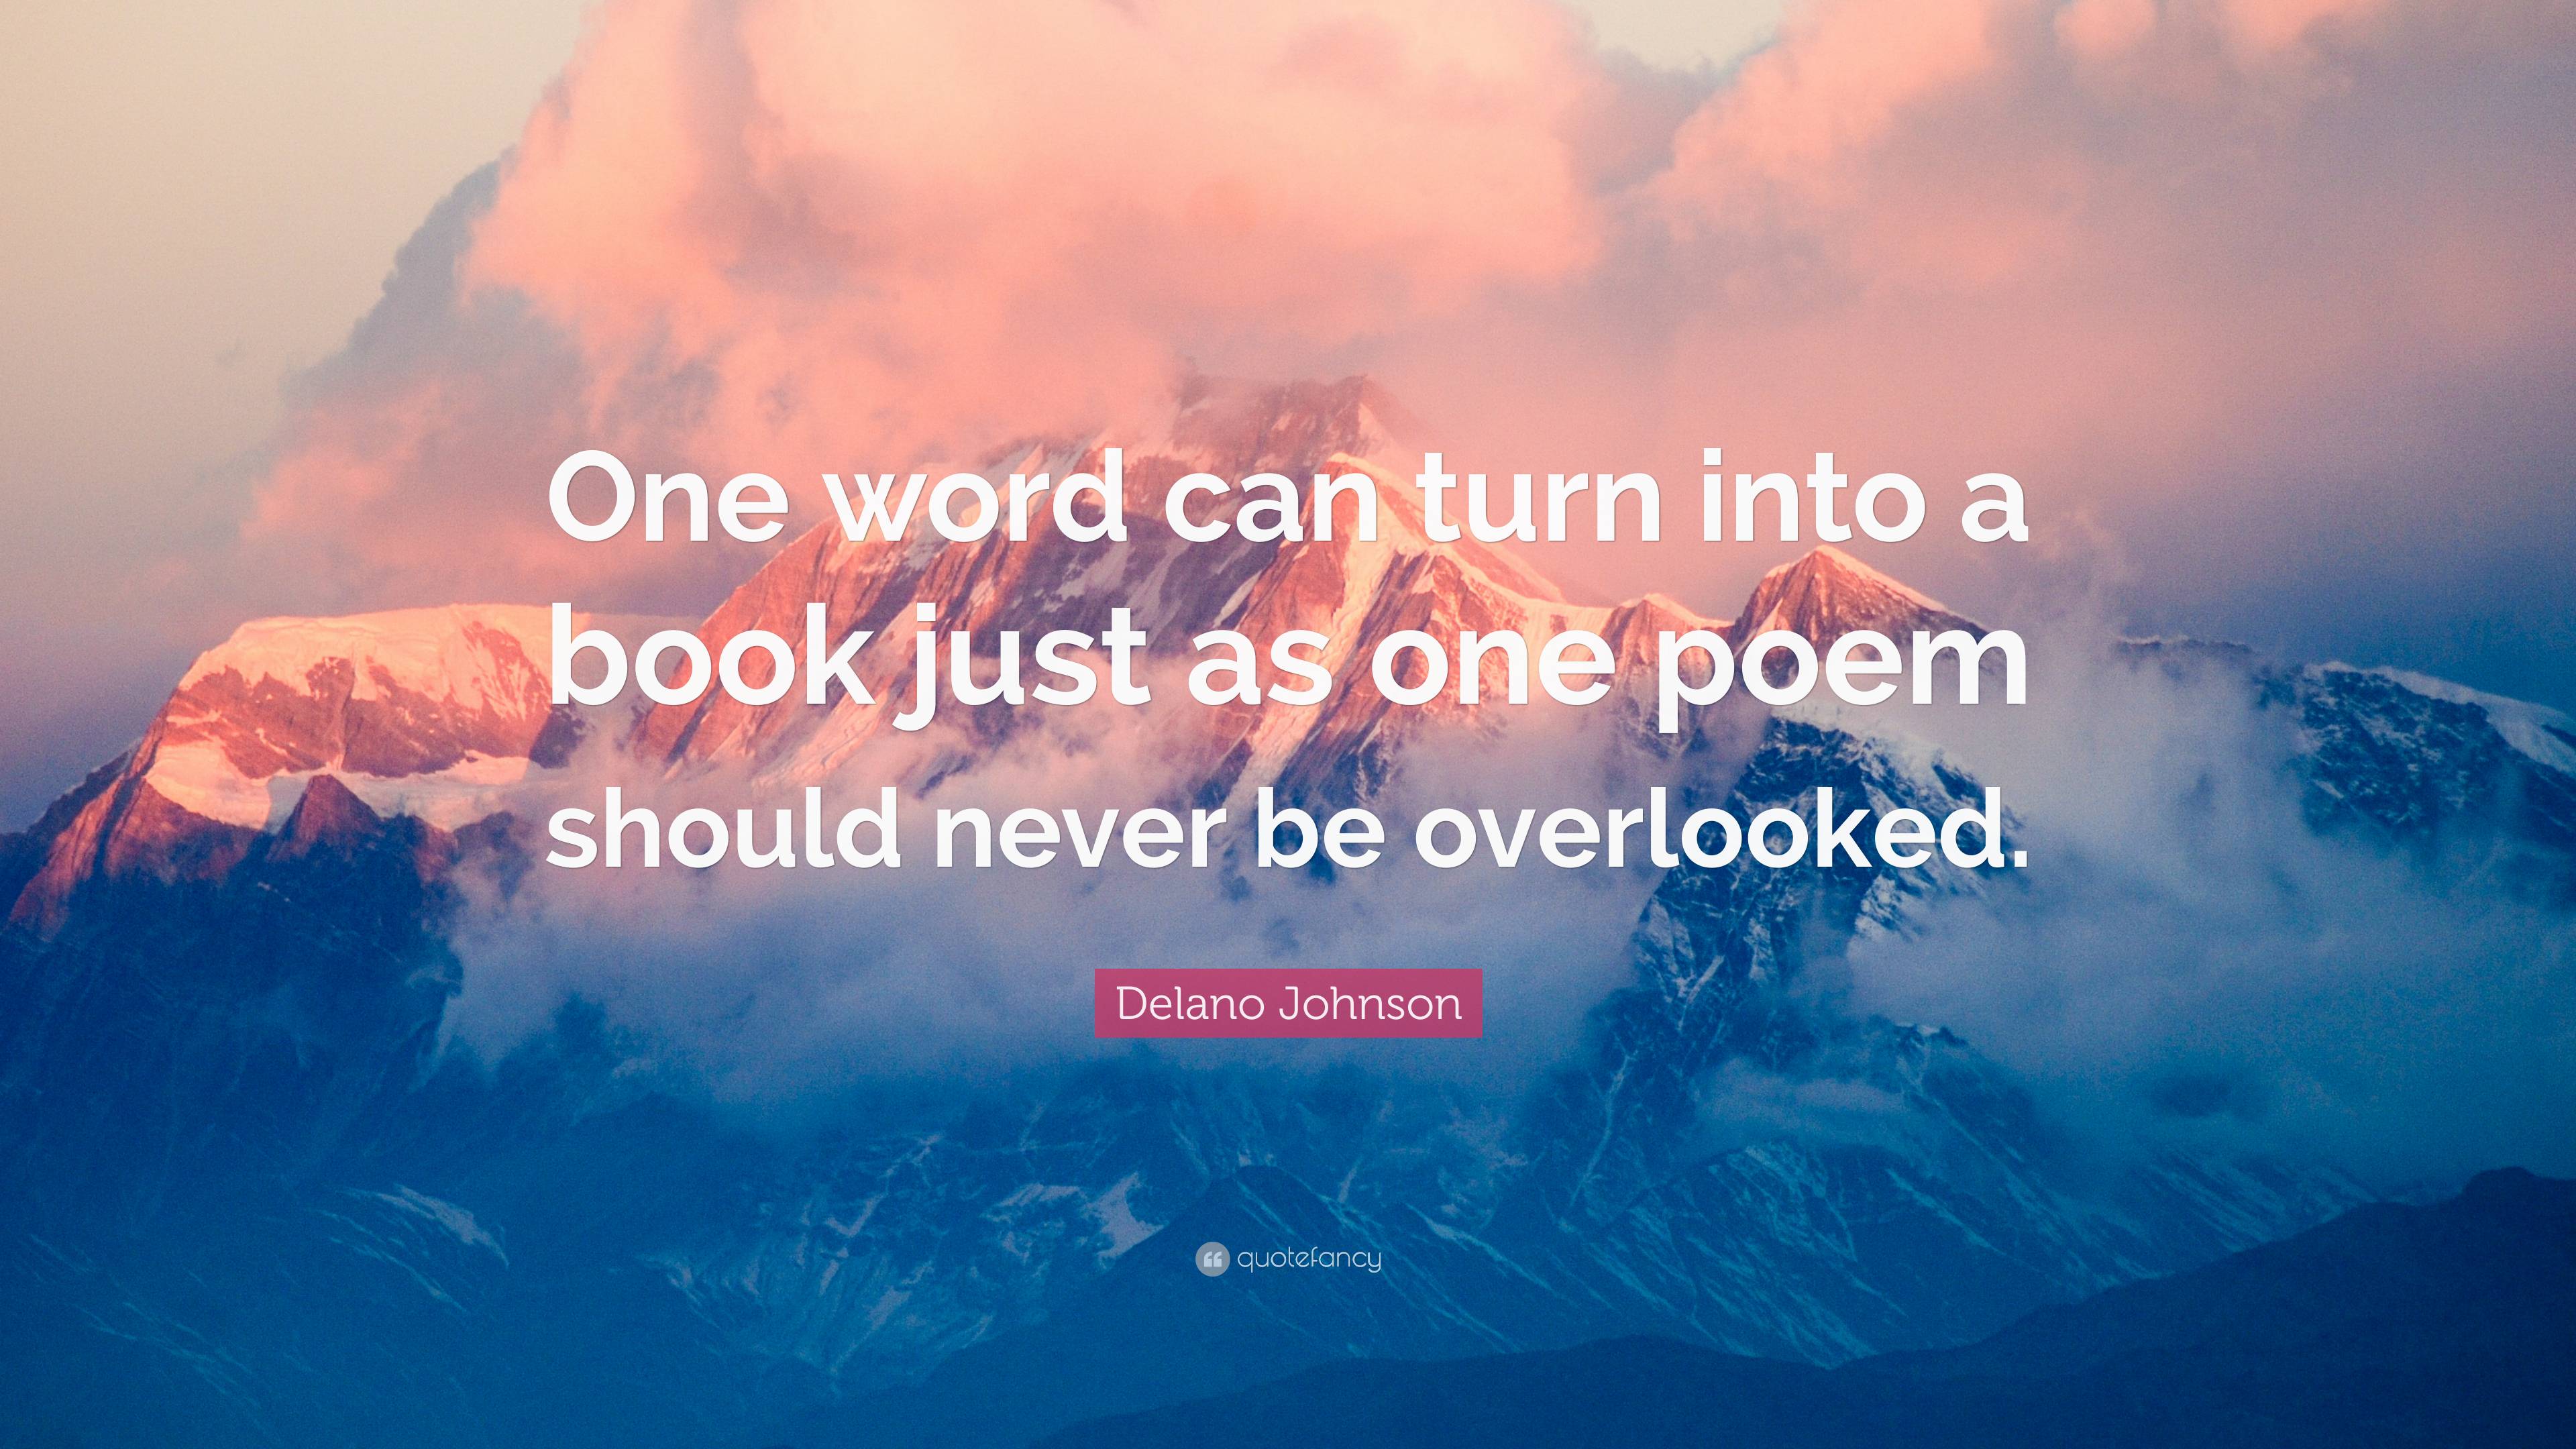 Delano Johnson Quote: “One word can turn into a book just as one poem ...